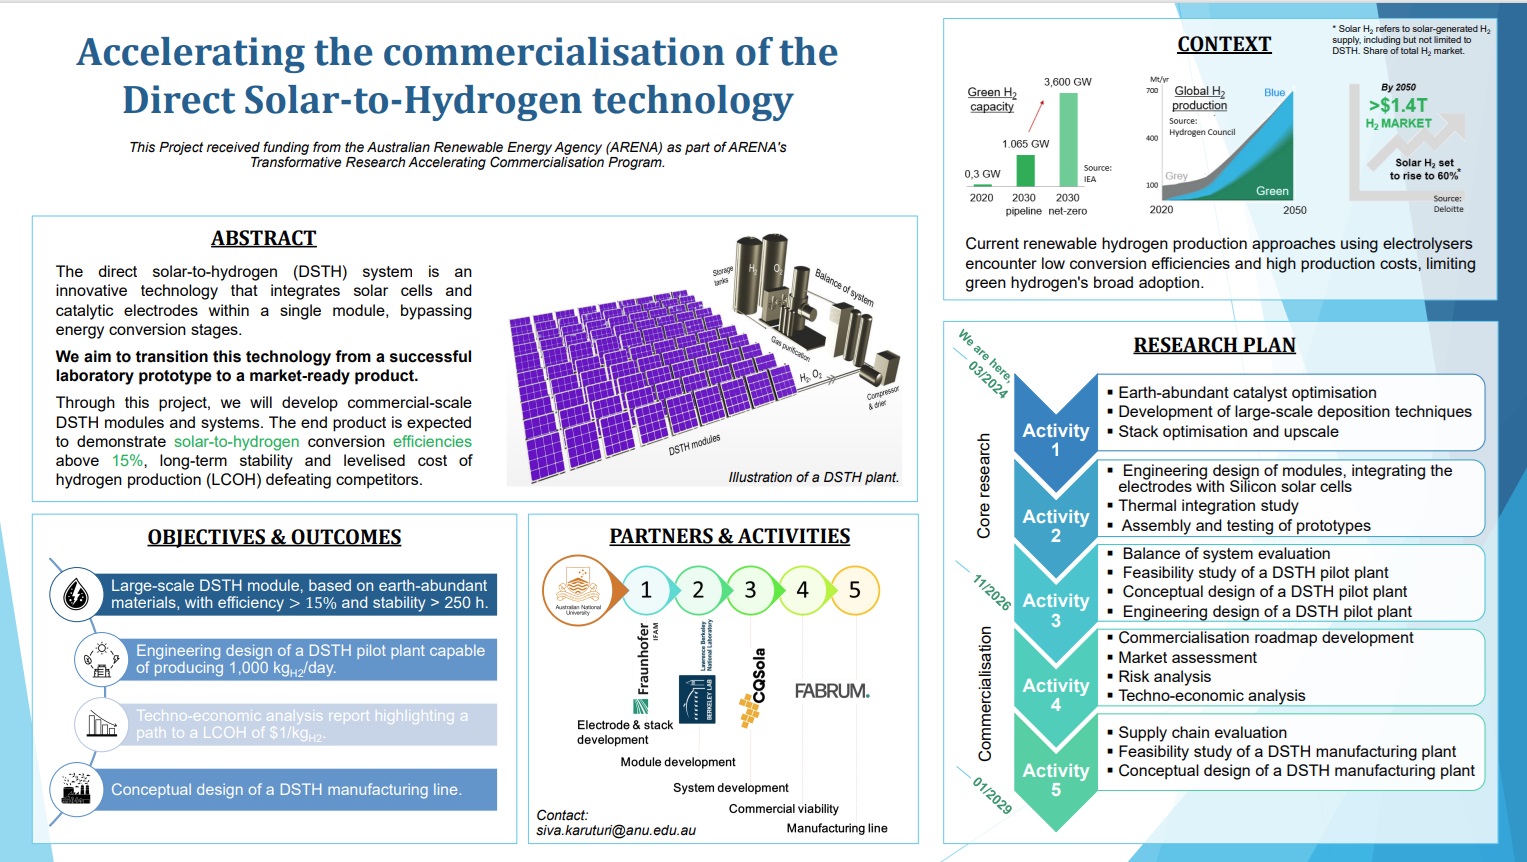 ANU - Accelerating the commercialisation of the Direct Solar-to-Hydrogen technology - Poster